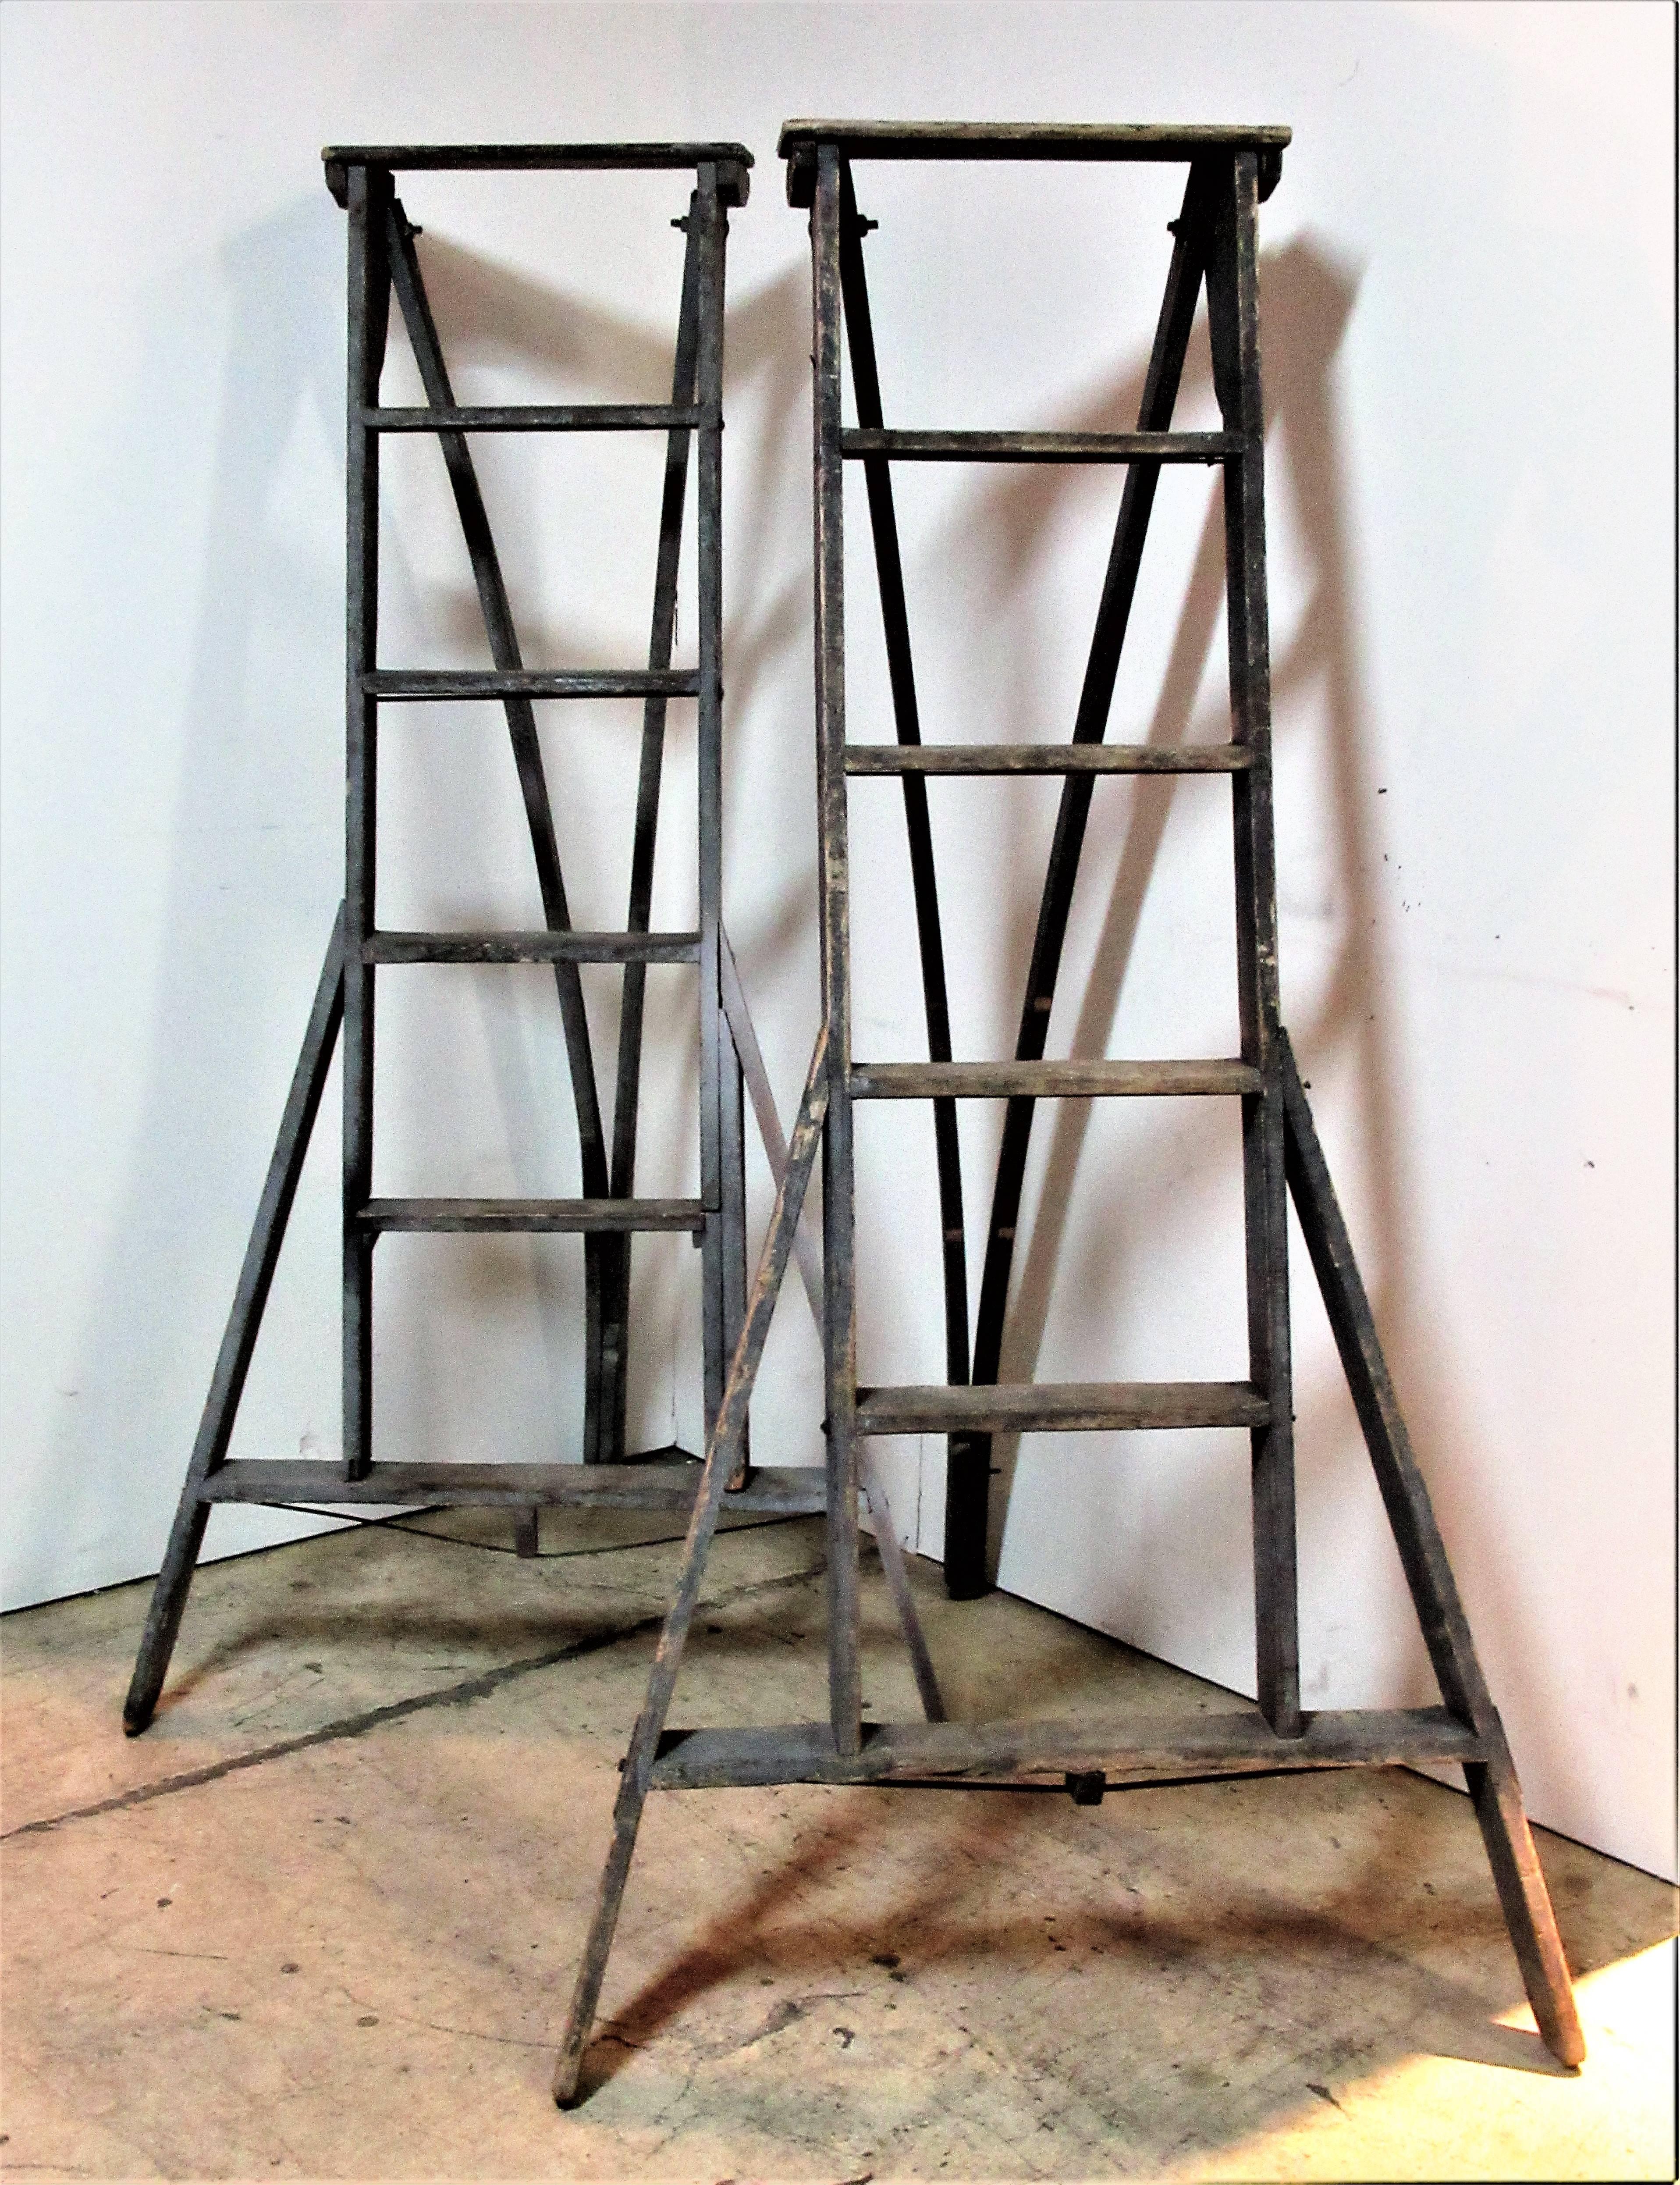 Two antique American wood & metal riveted apple fruit picking ladders in great old original dry dark slate gray and lighter gray painted surface with beautiful naturally age weathered patina from years of use. Both are incise stamped signed with the